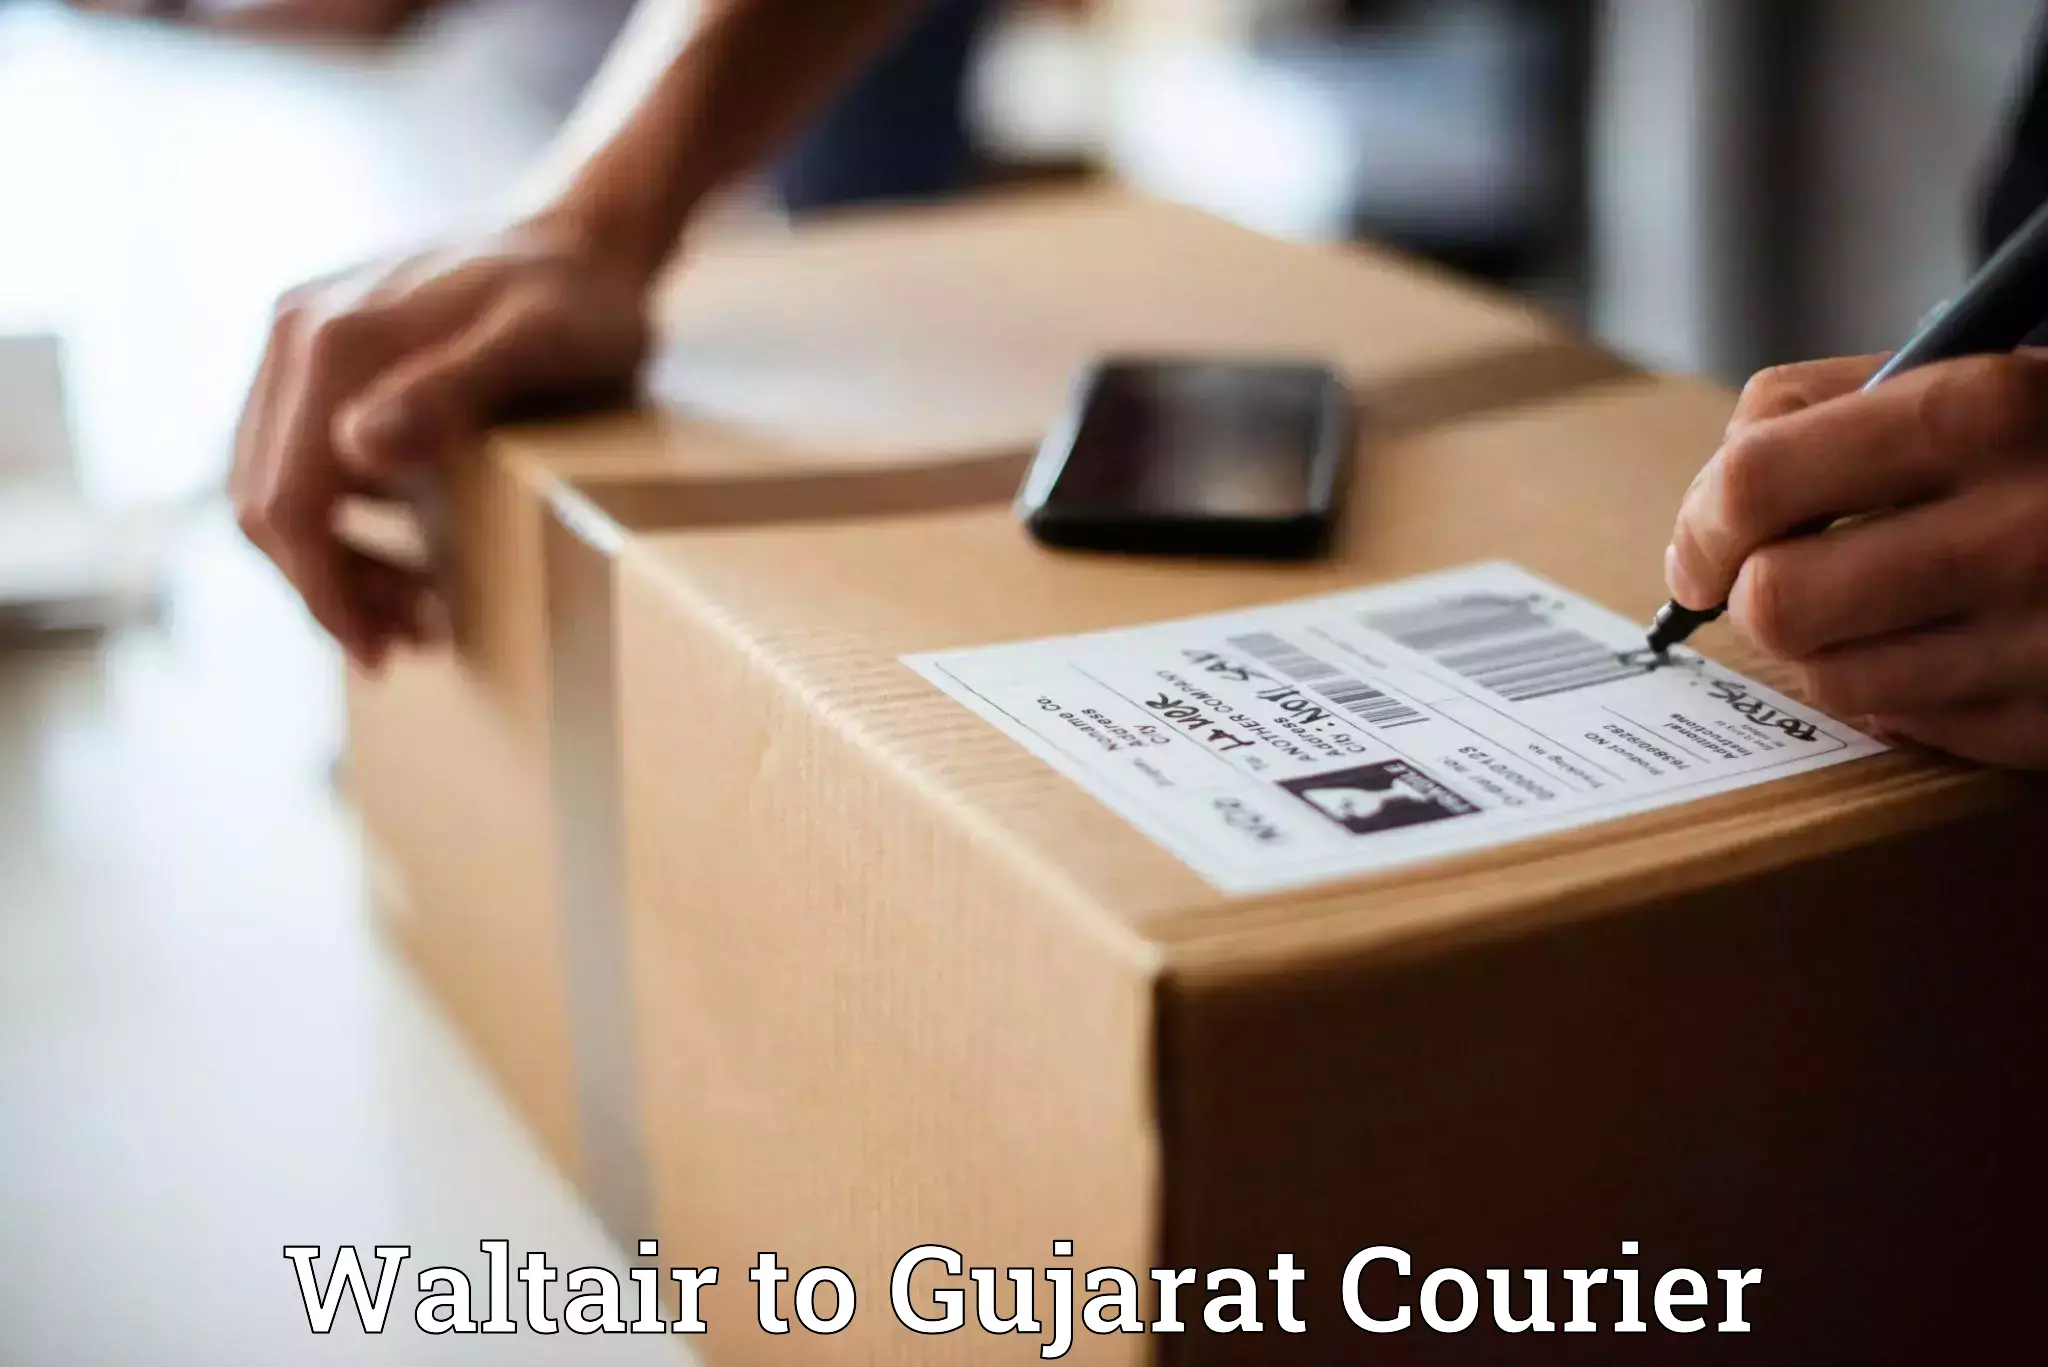 Global logistics network Waltair to Anand